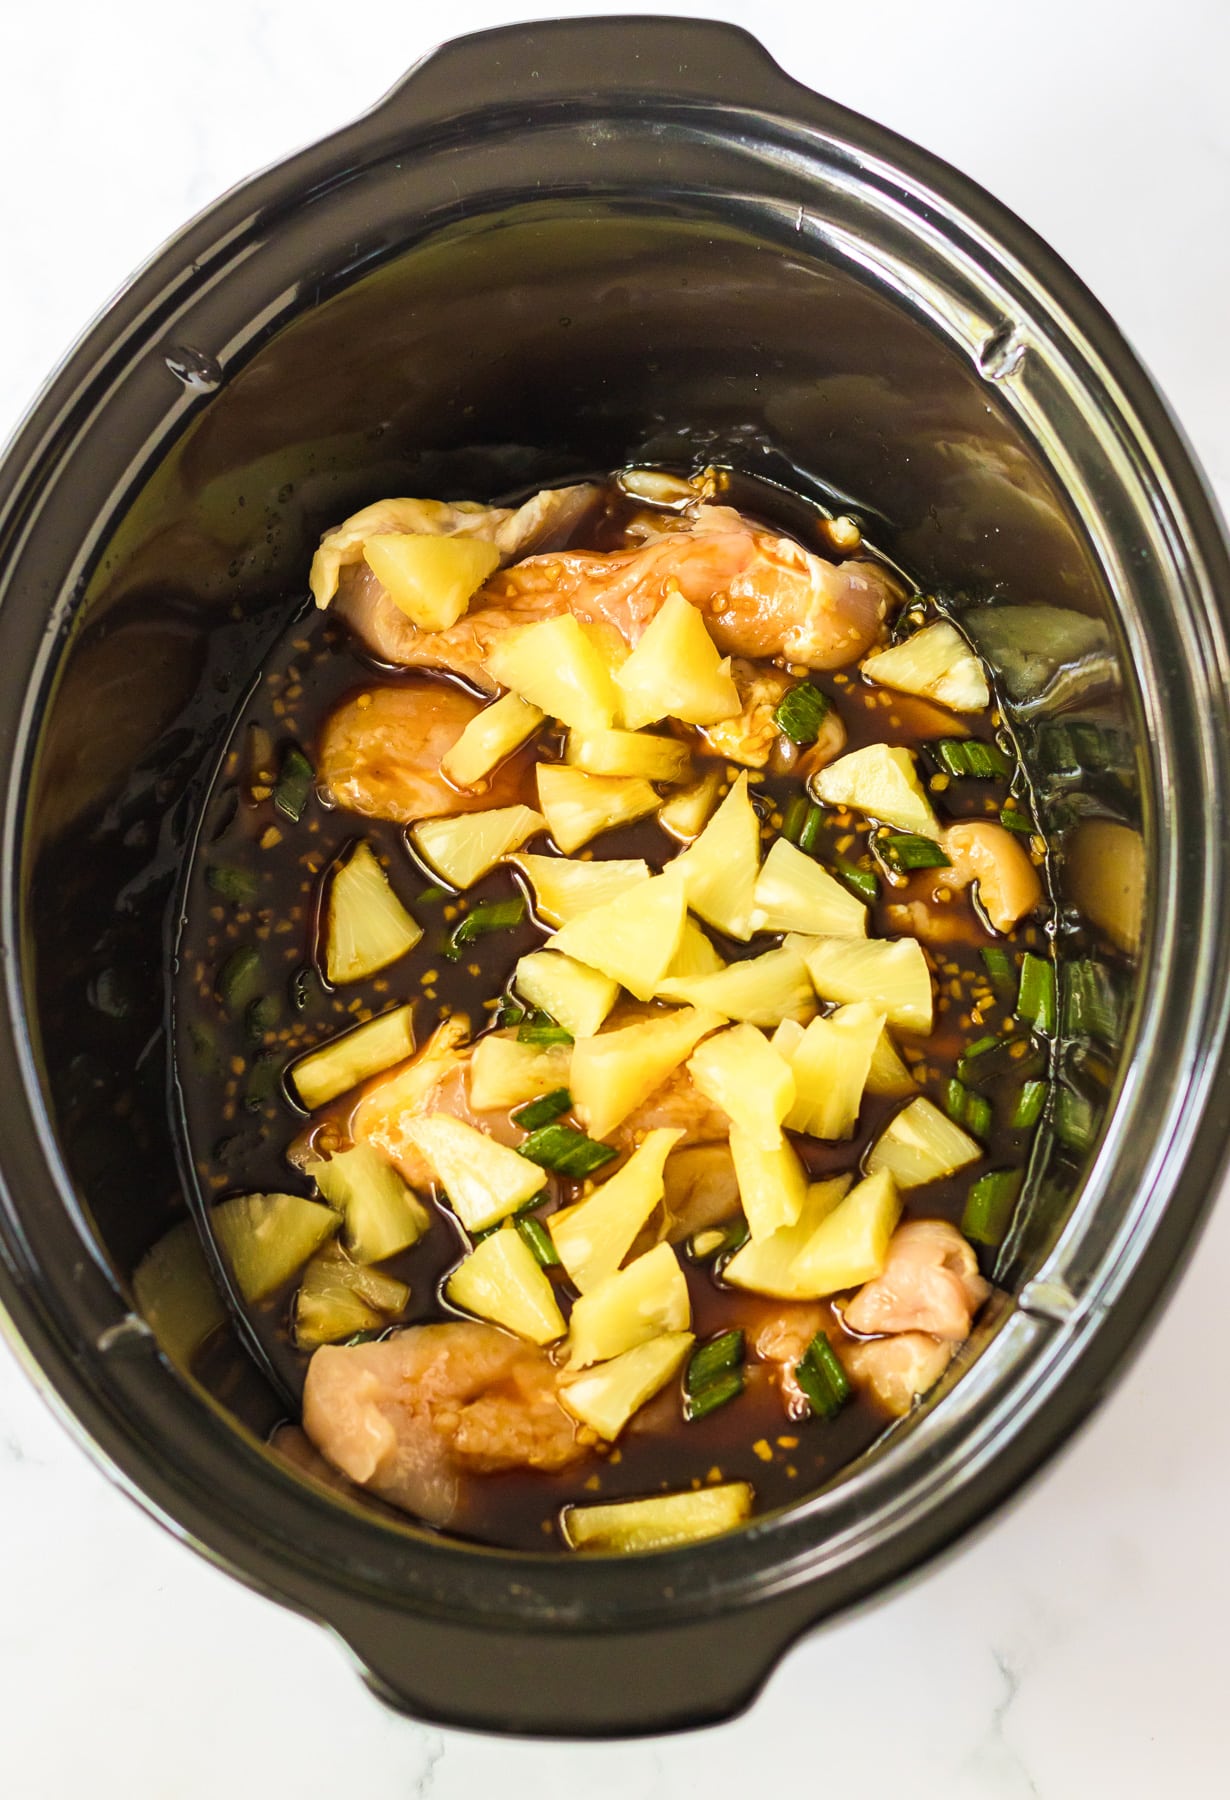 Raw chicken and pineapple pieces in a sauce in a slowcooker base from overhead.